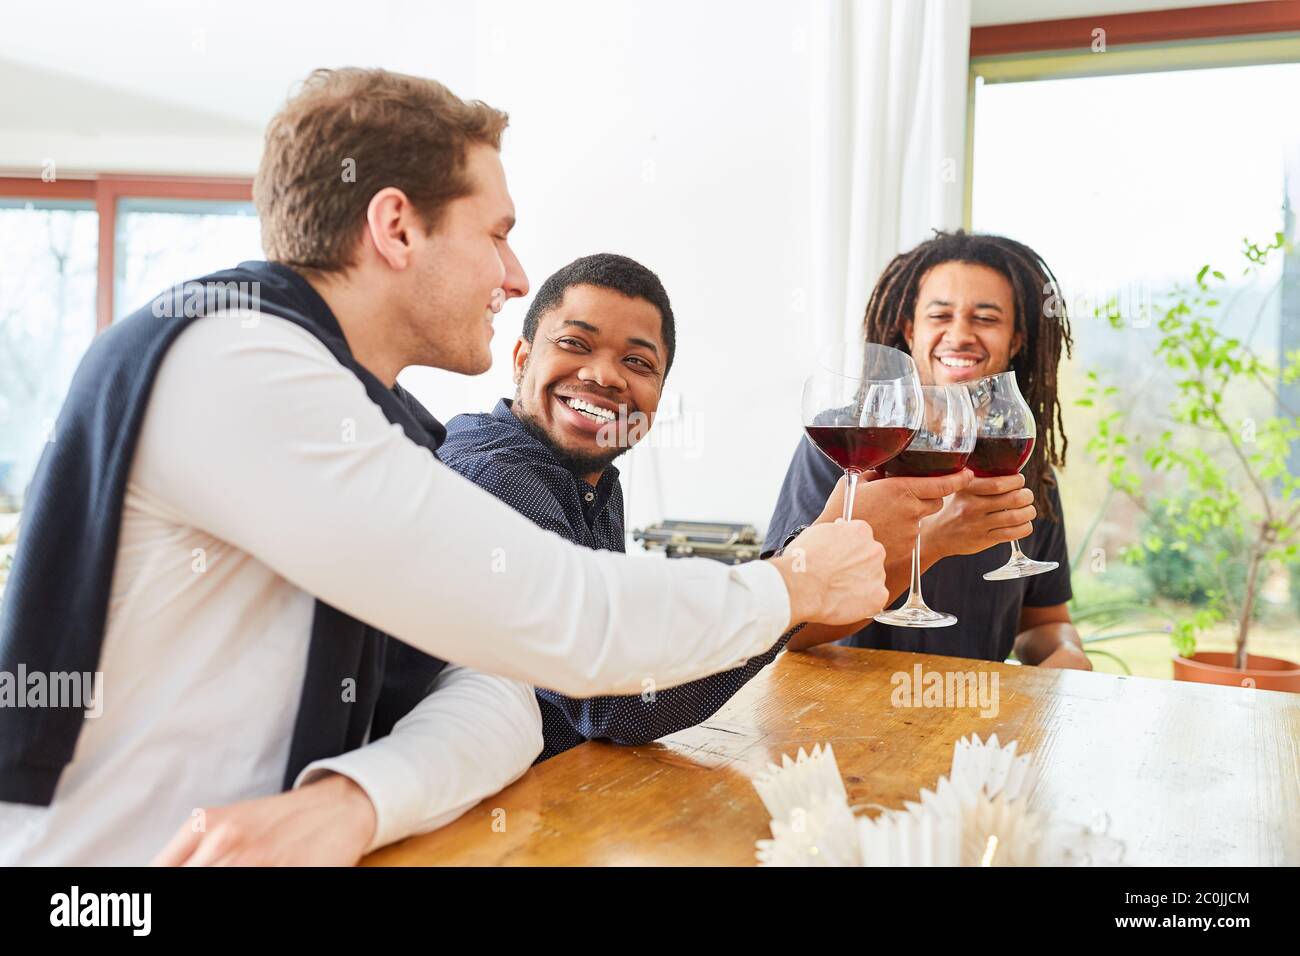 Group of men as friends drink glass of red wine together and laugh together Stock Photo